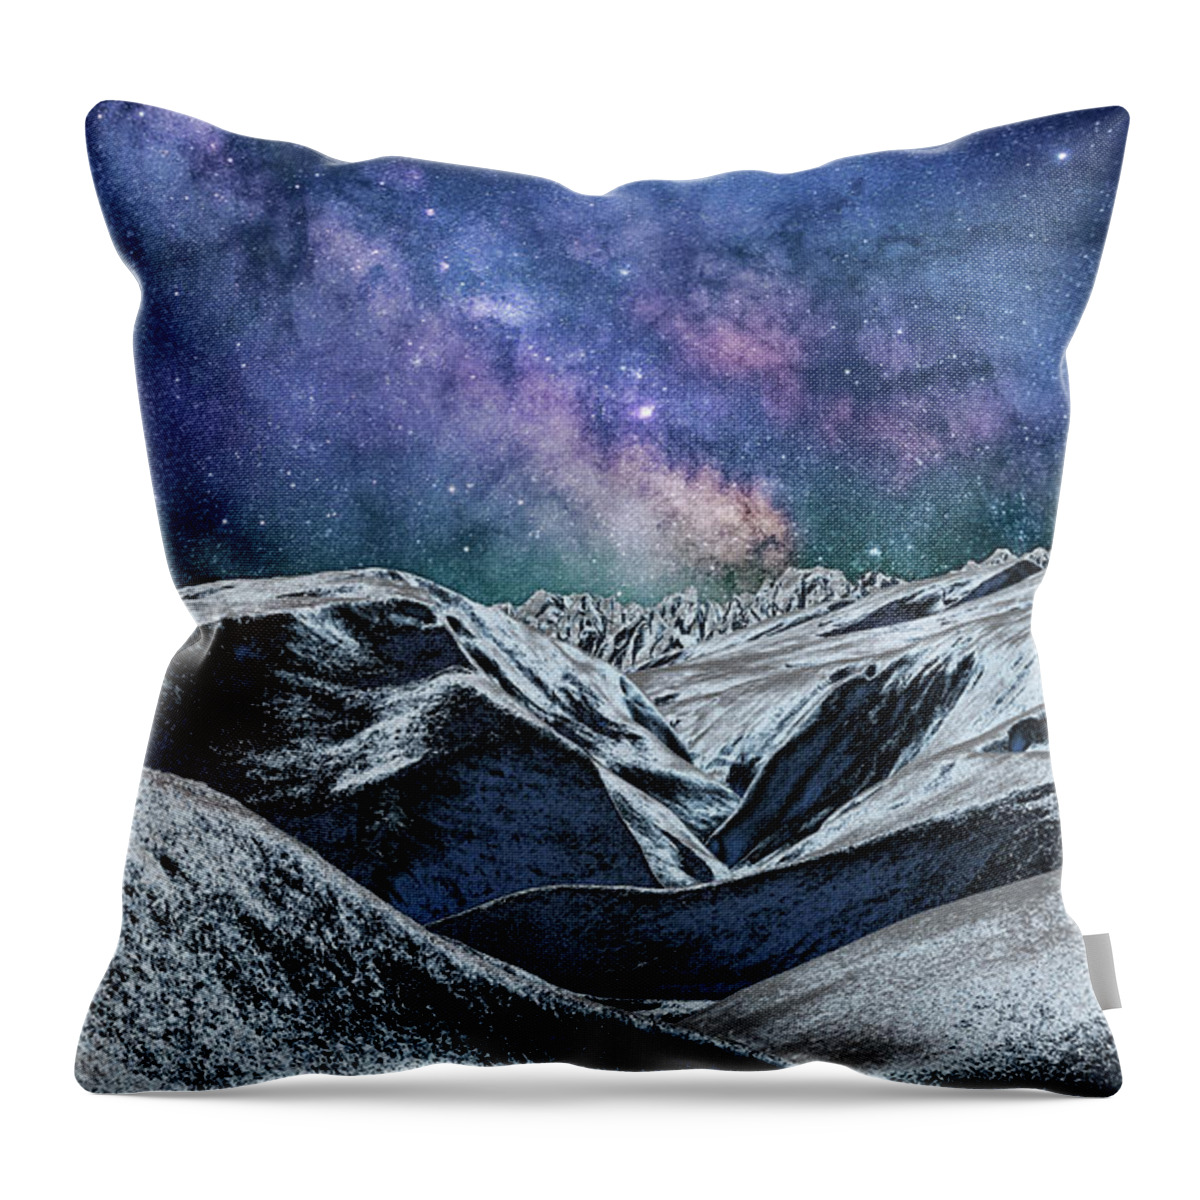 Planet Throw Pillow featuring the digital art Sci Fi World by Phil Perkins